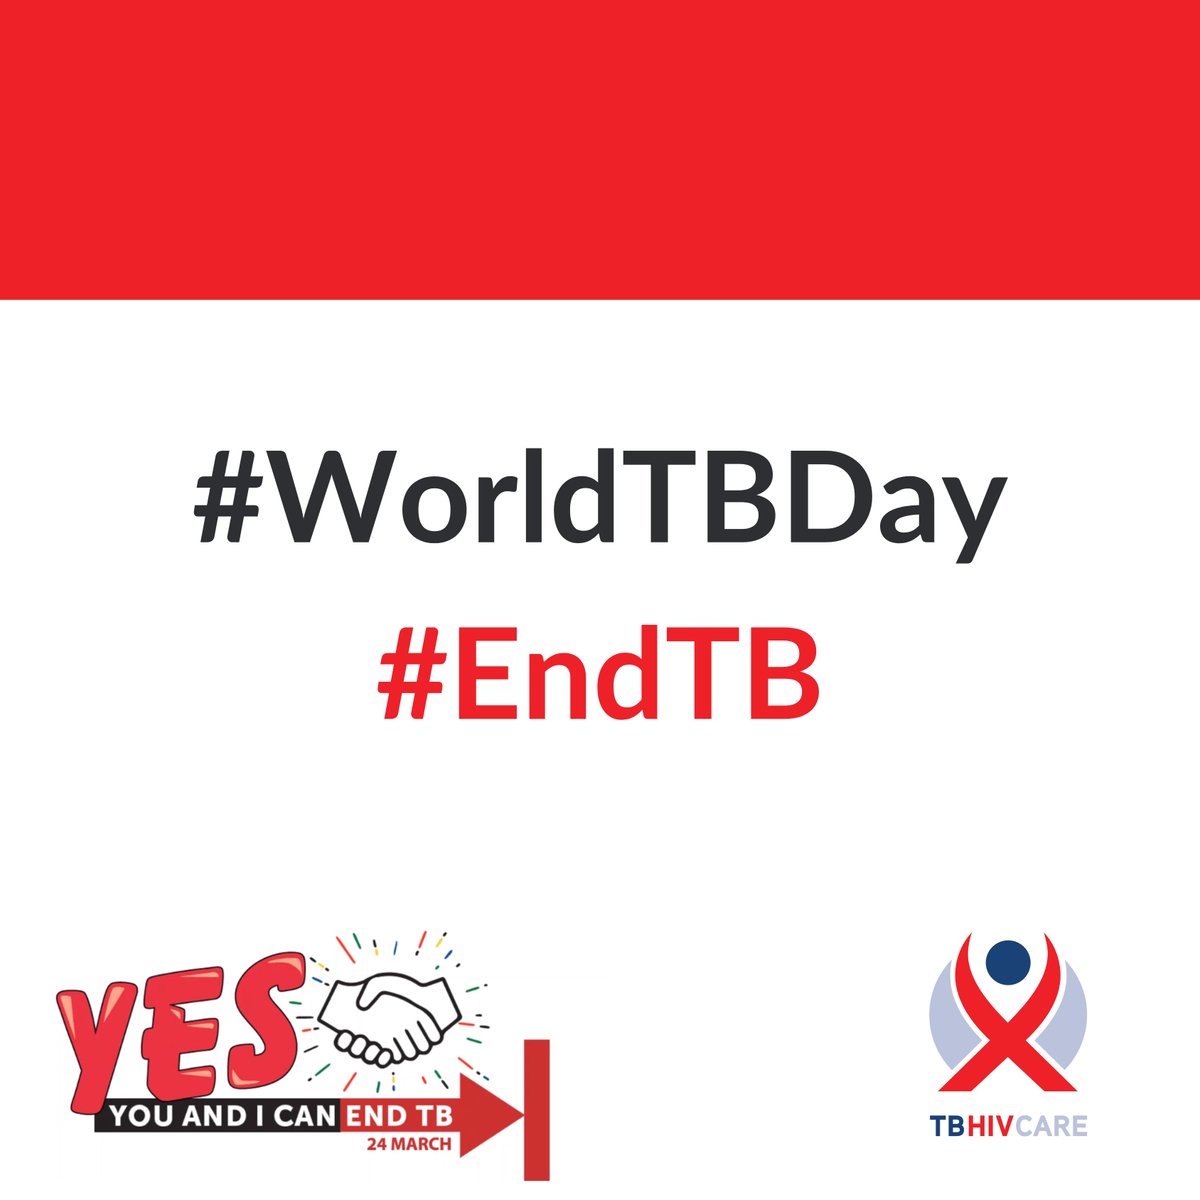 No one should ever die from a preventable and curable disease. This #WorldTBDay everyone should know the symptoms of TB, get tested, complete their treatment and know that together we can end TB! #WorldTBDay #EndTB @SA_AIDSCOUNCIL @HealthZA @WeBeatTB @StopTB